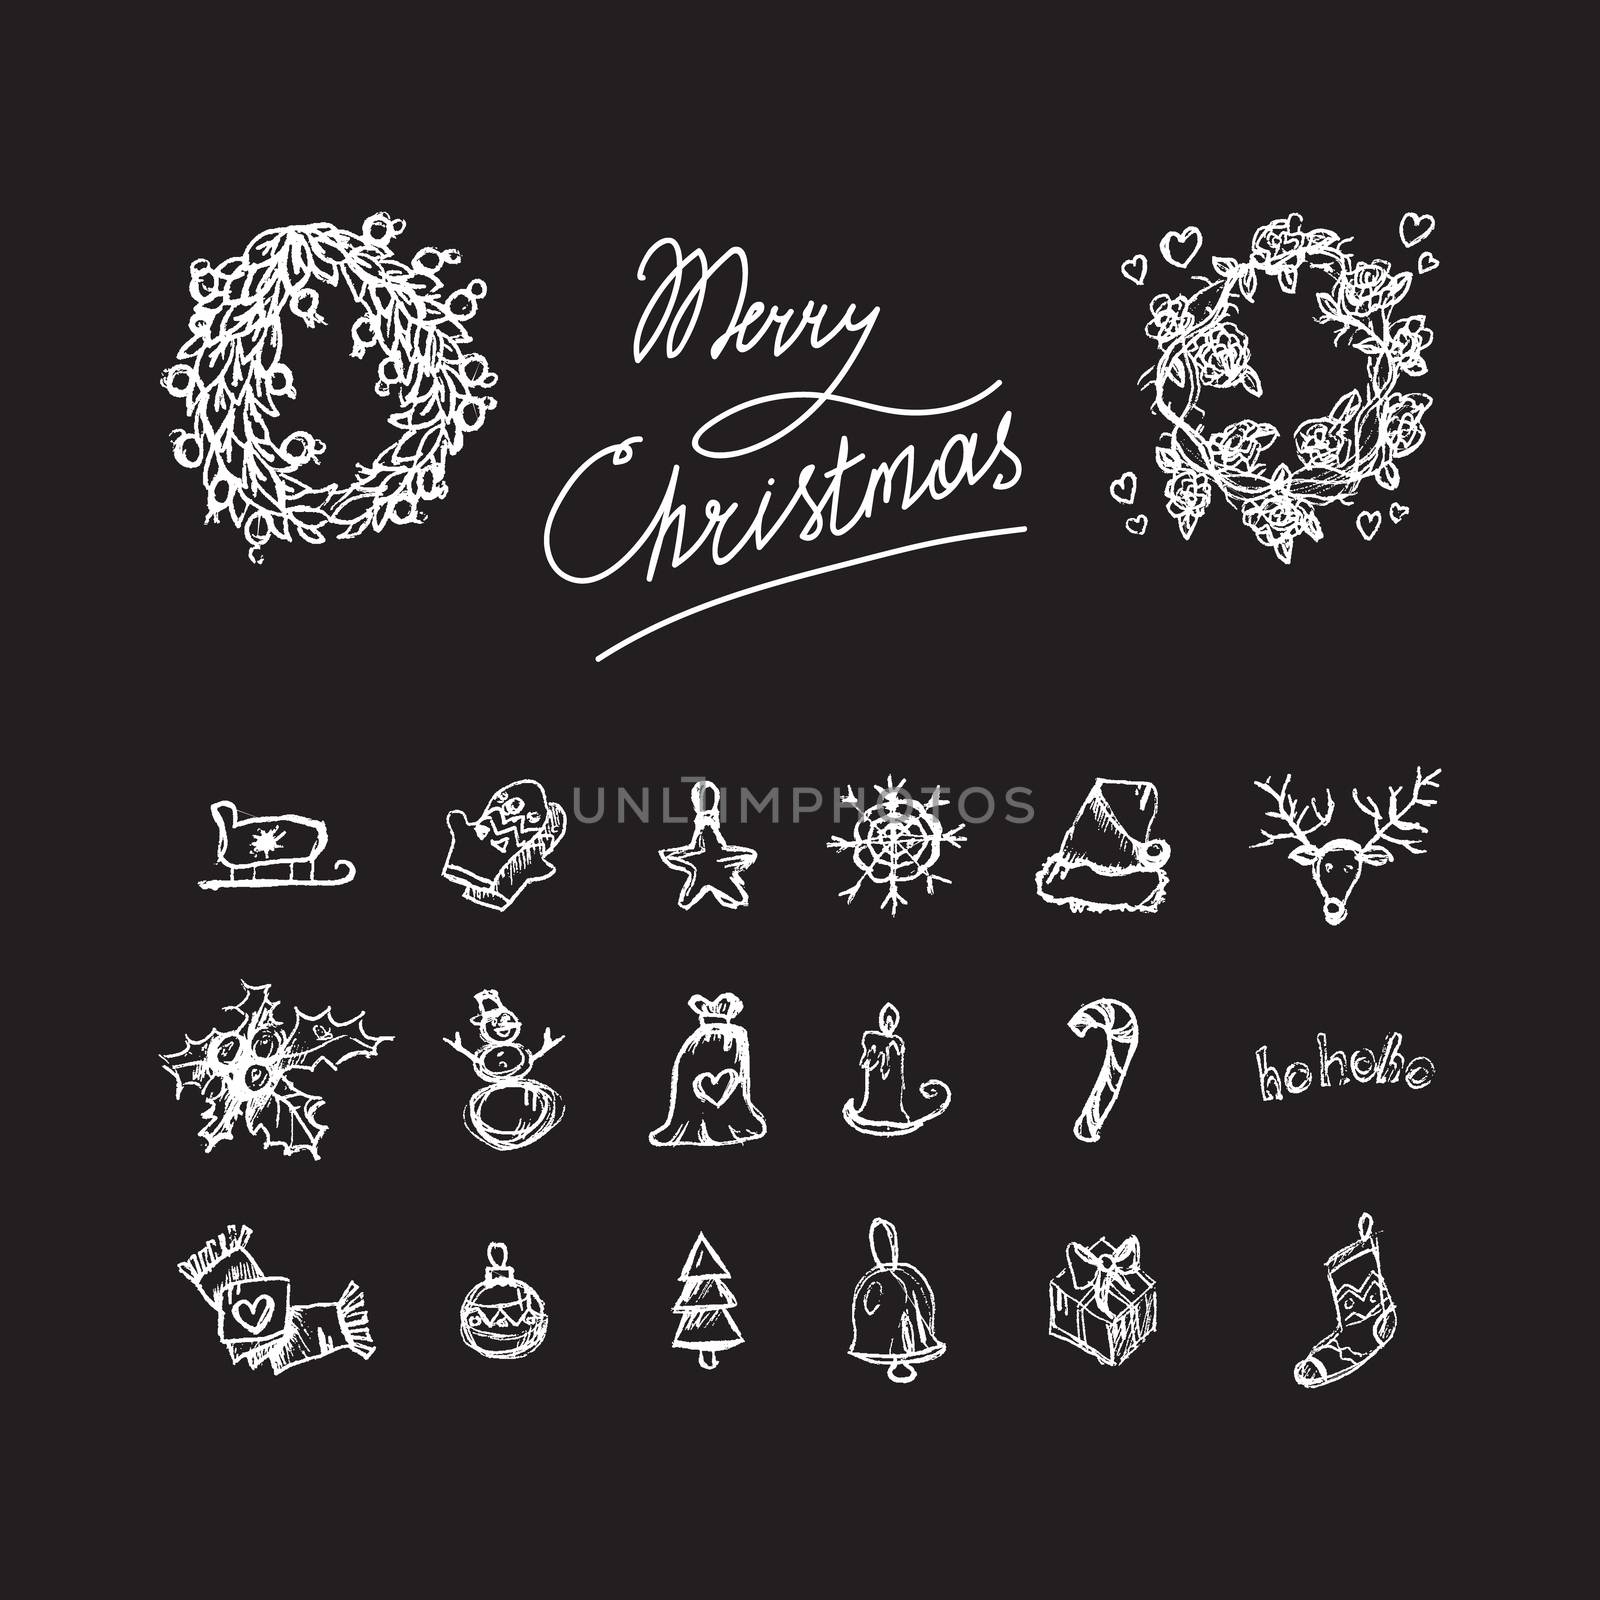 Merry Christmas icons by barsrsind